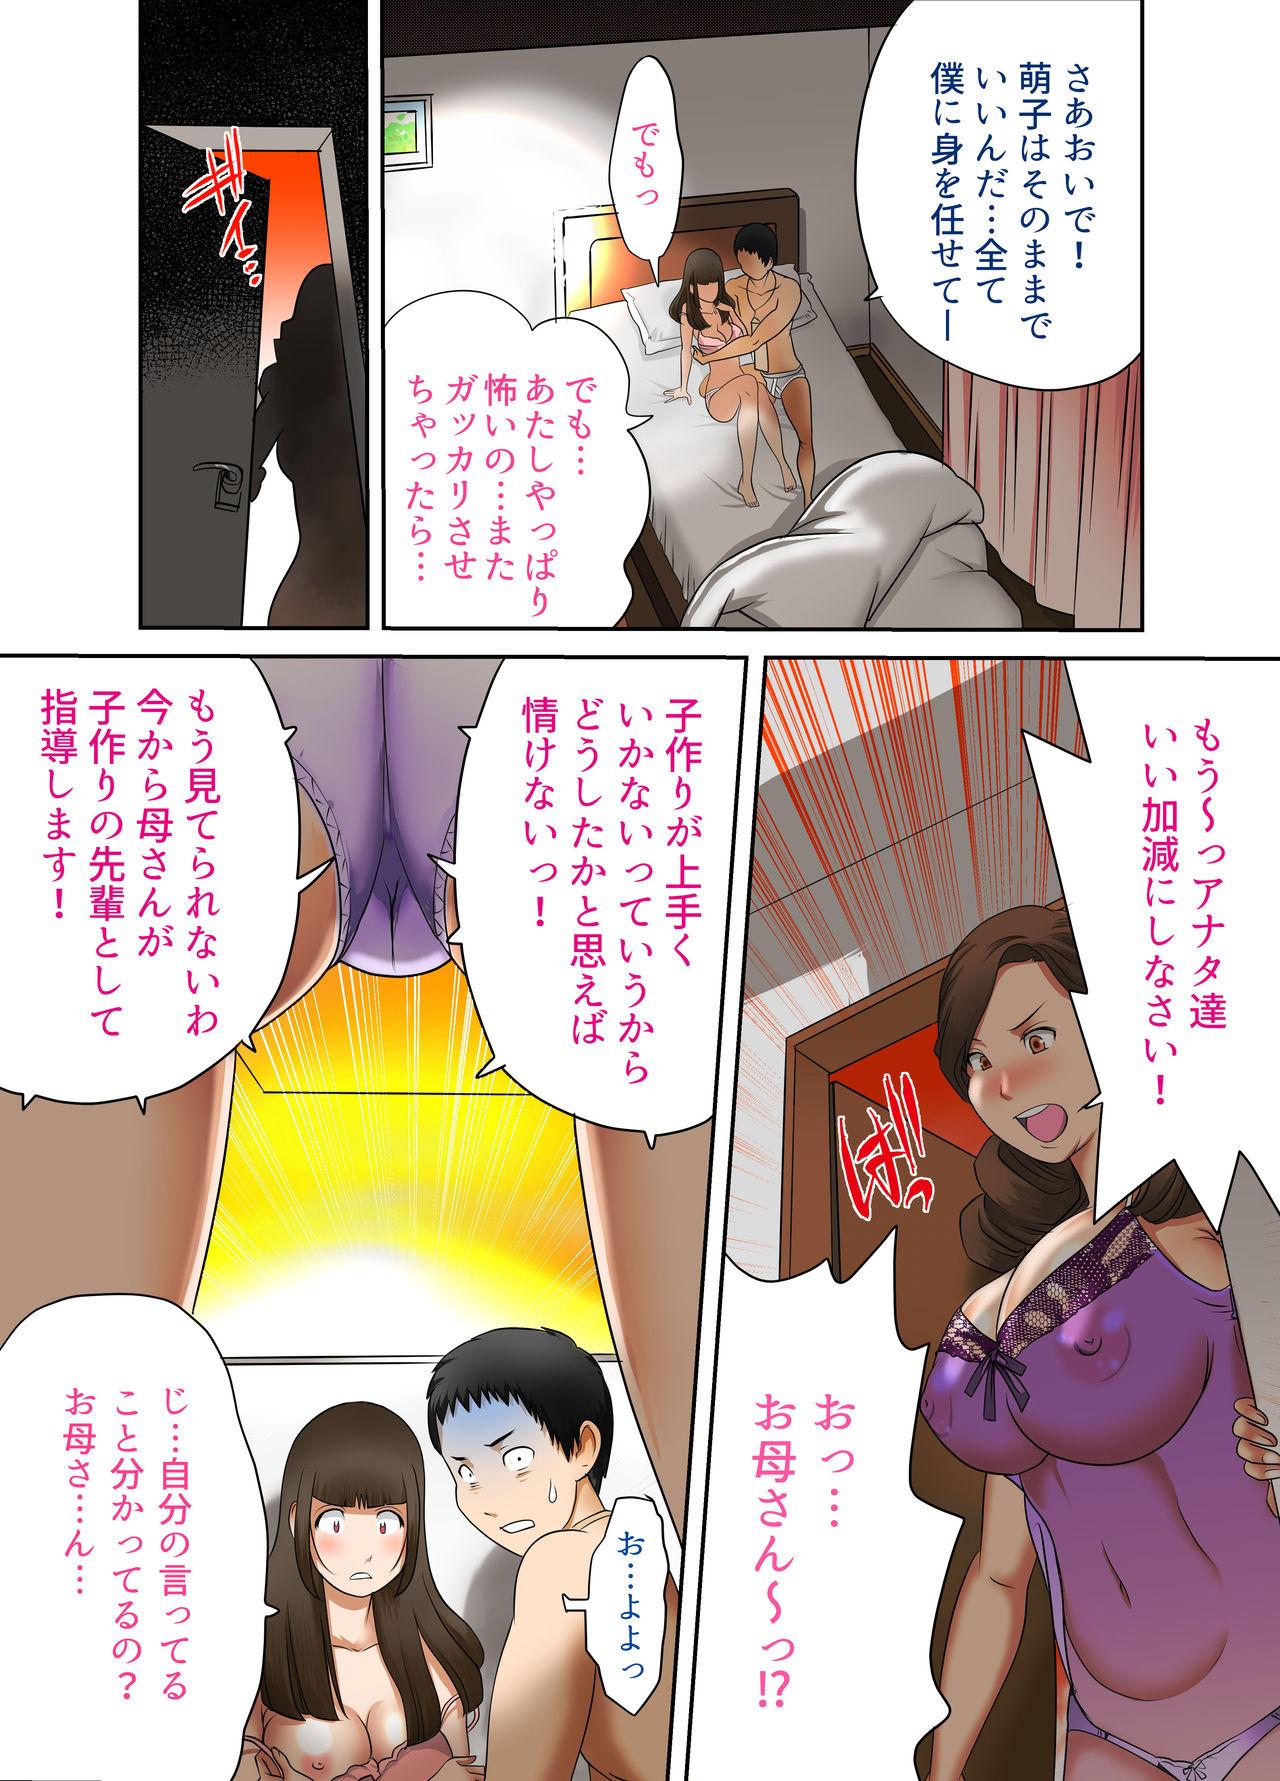 If one day suddenly the bodies of my wife and mother-in-law changed, it was various incest Vol 6 7